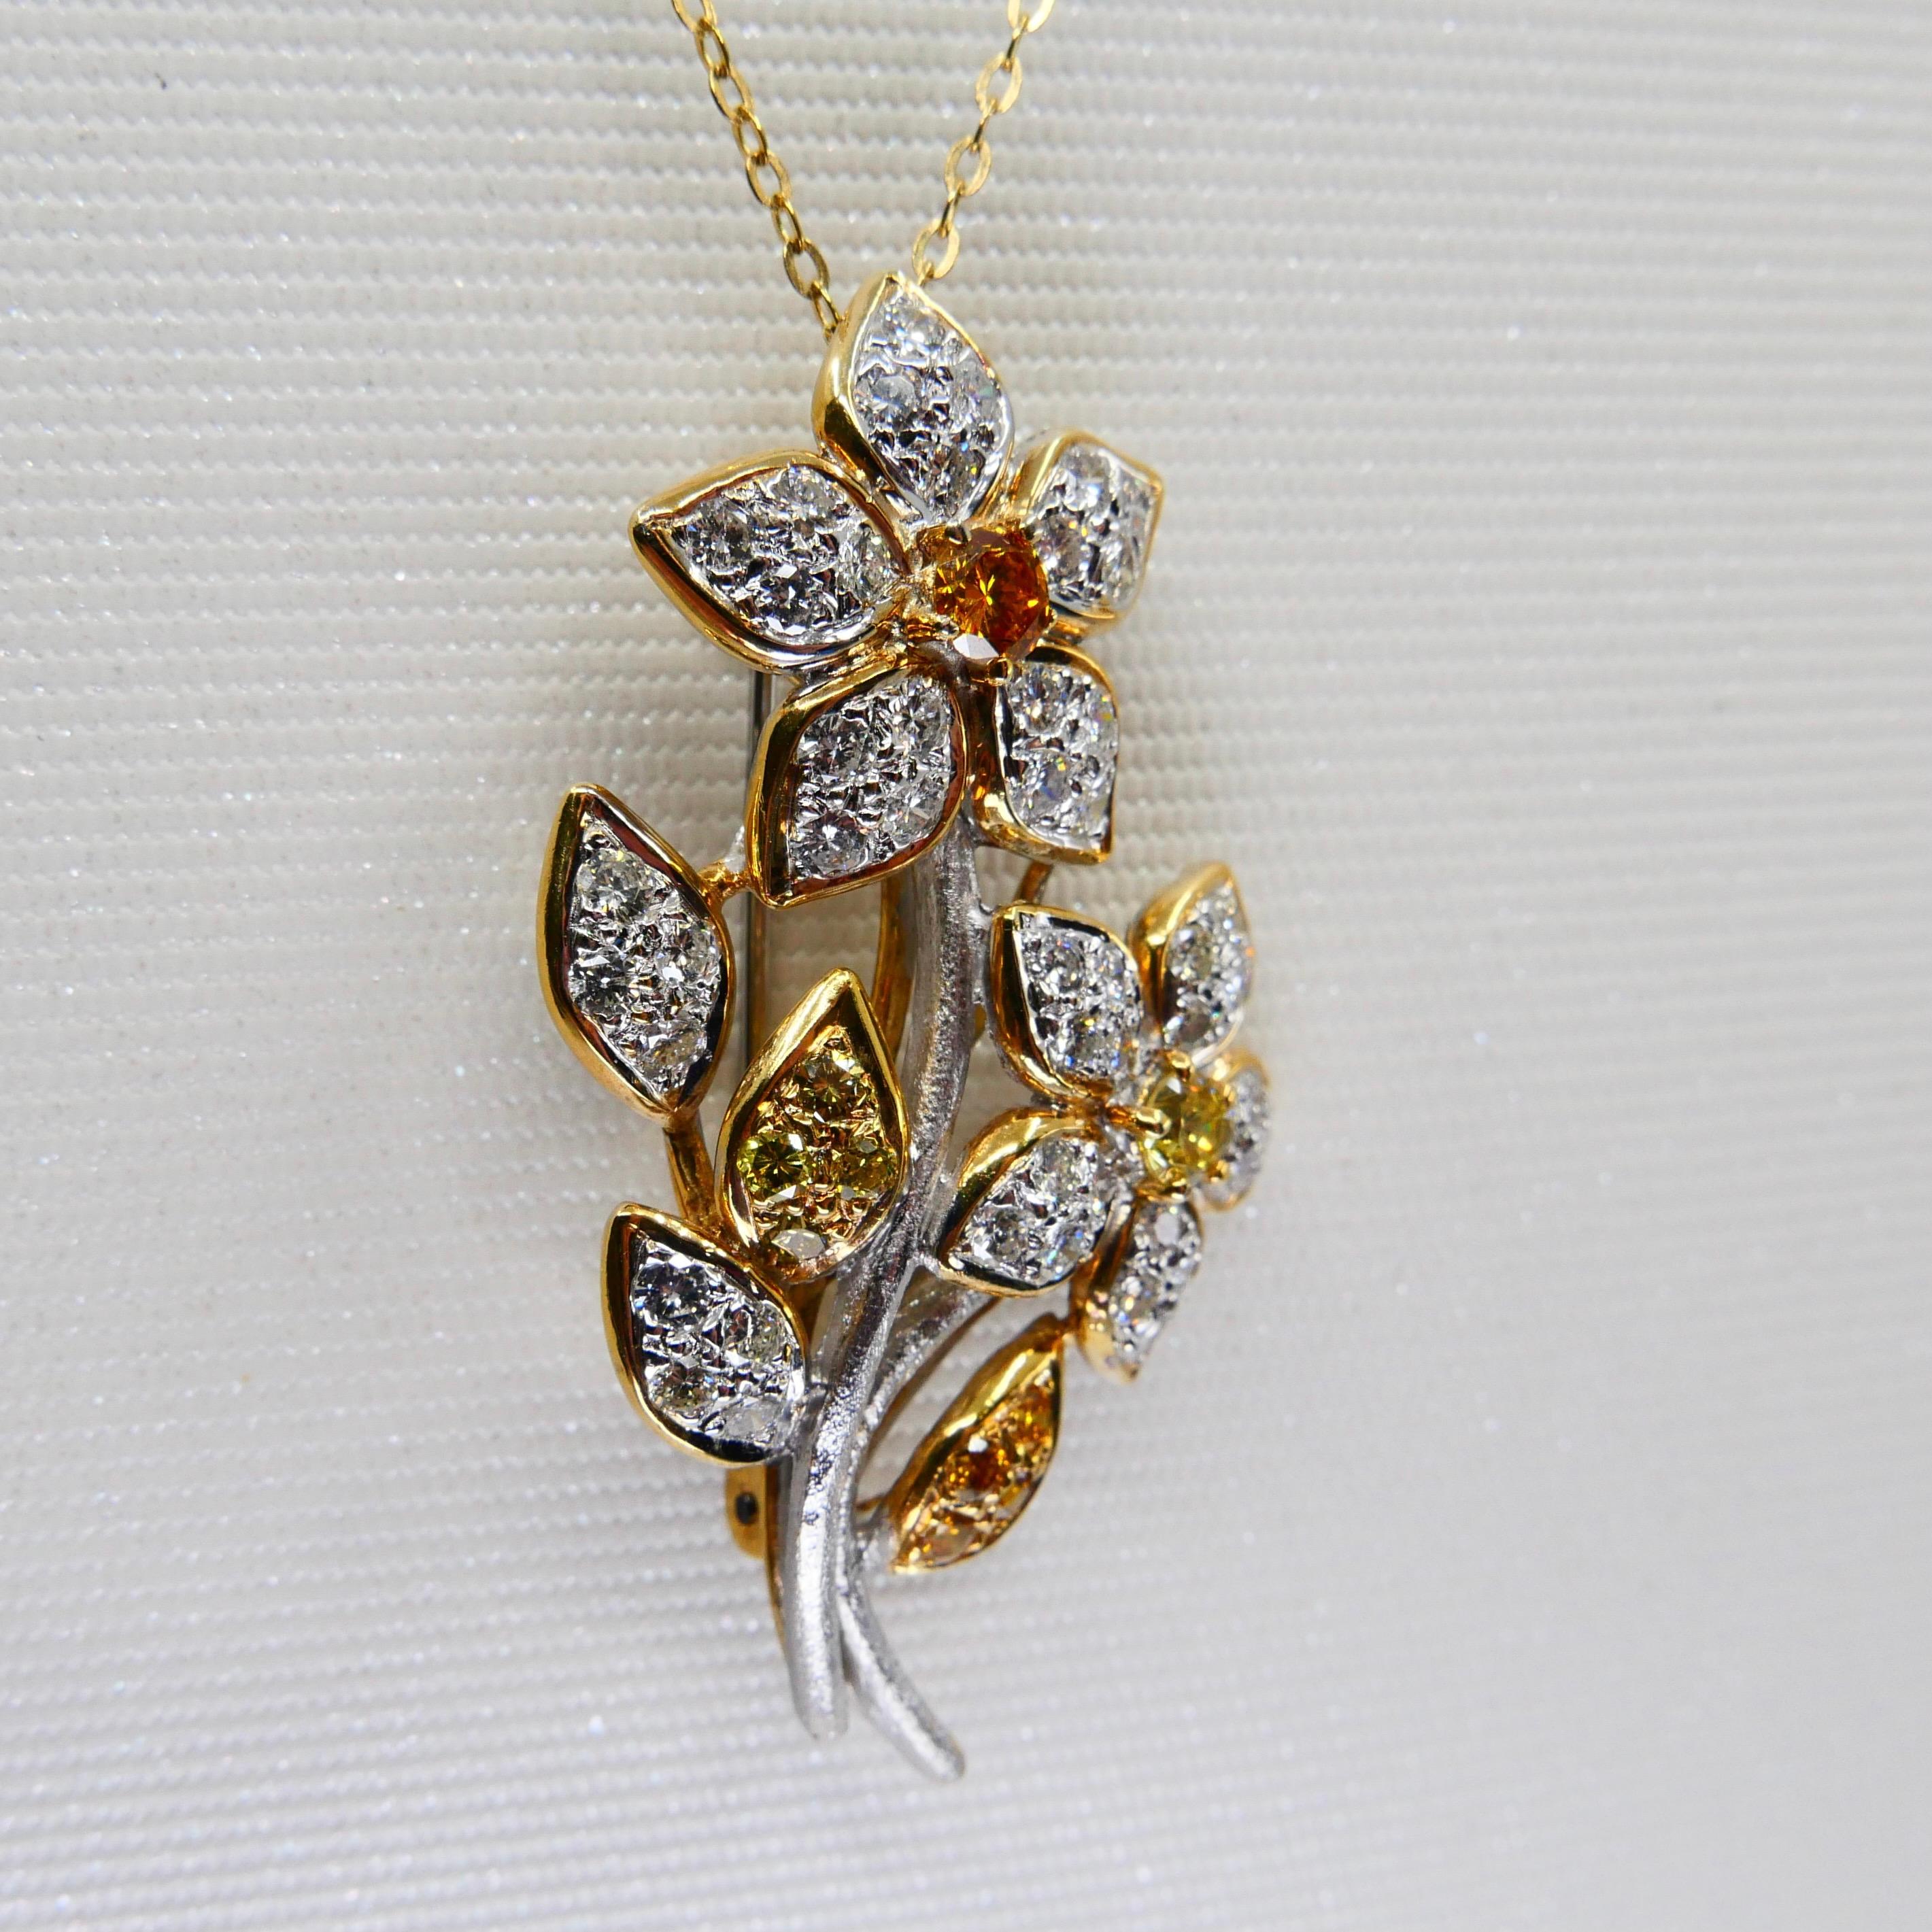 18K Gold, White and Fancy Yellow Color Diamond Flower Brooch Pendant, Two Use For Sale 4